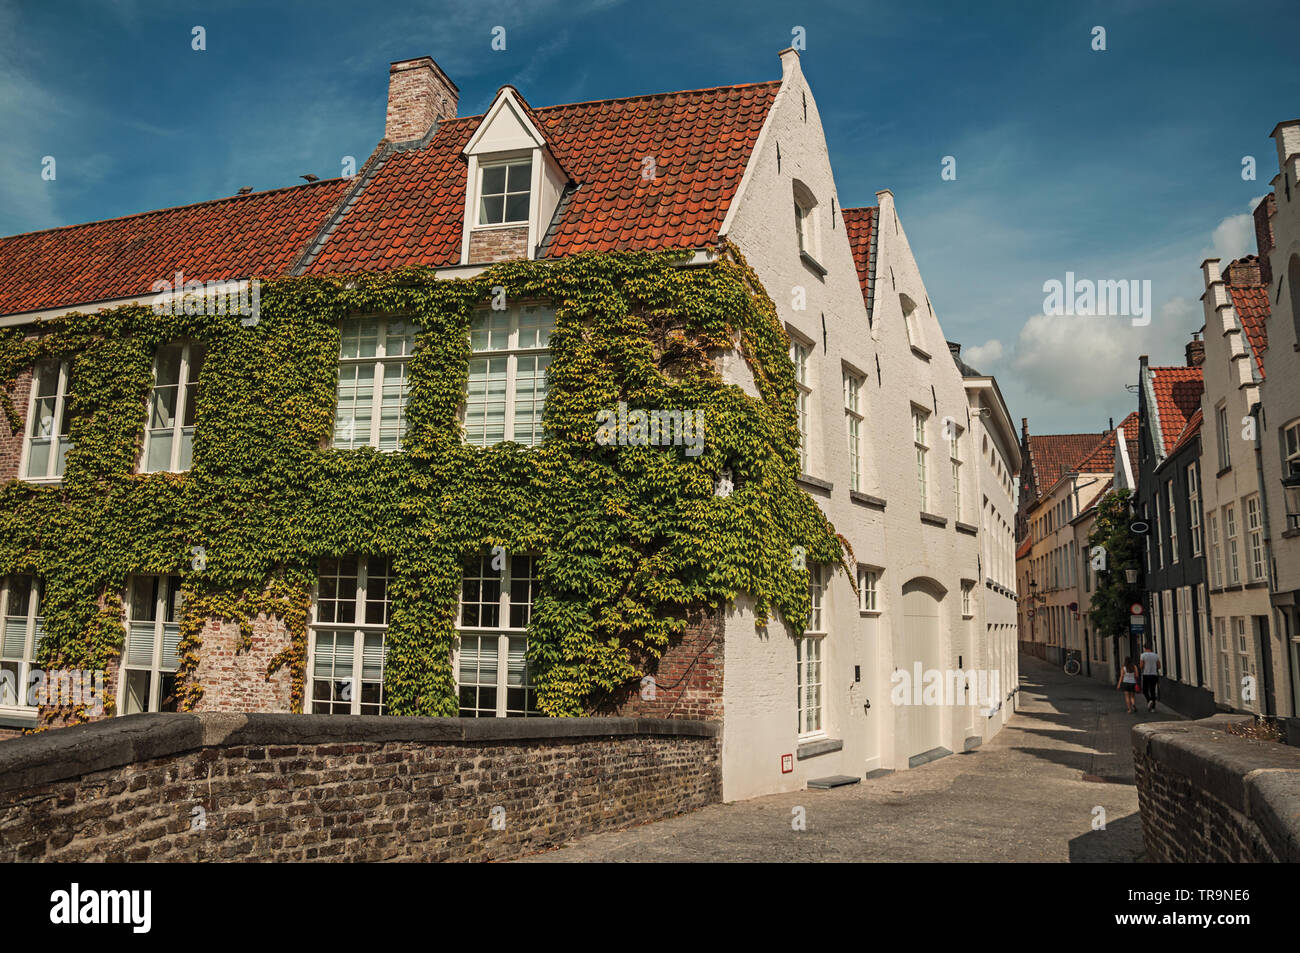 Bridge and brick buildings with creeper on the canal edge in a sunny day at Bruges. Charming town with canals and old buildings in Belgium. Stock Photo